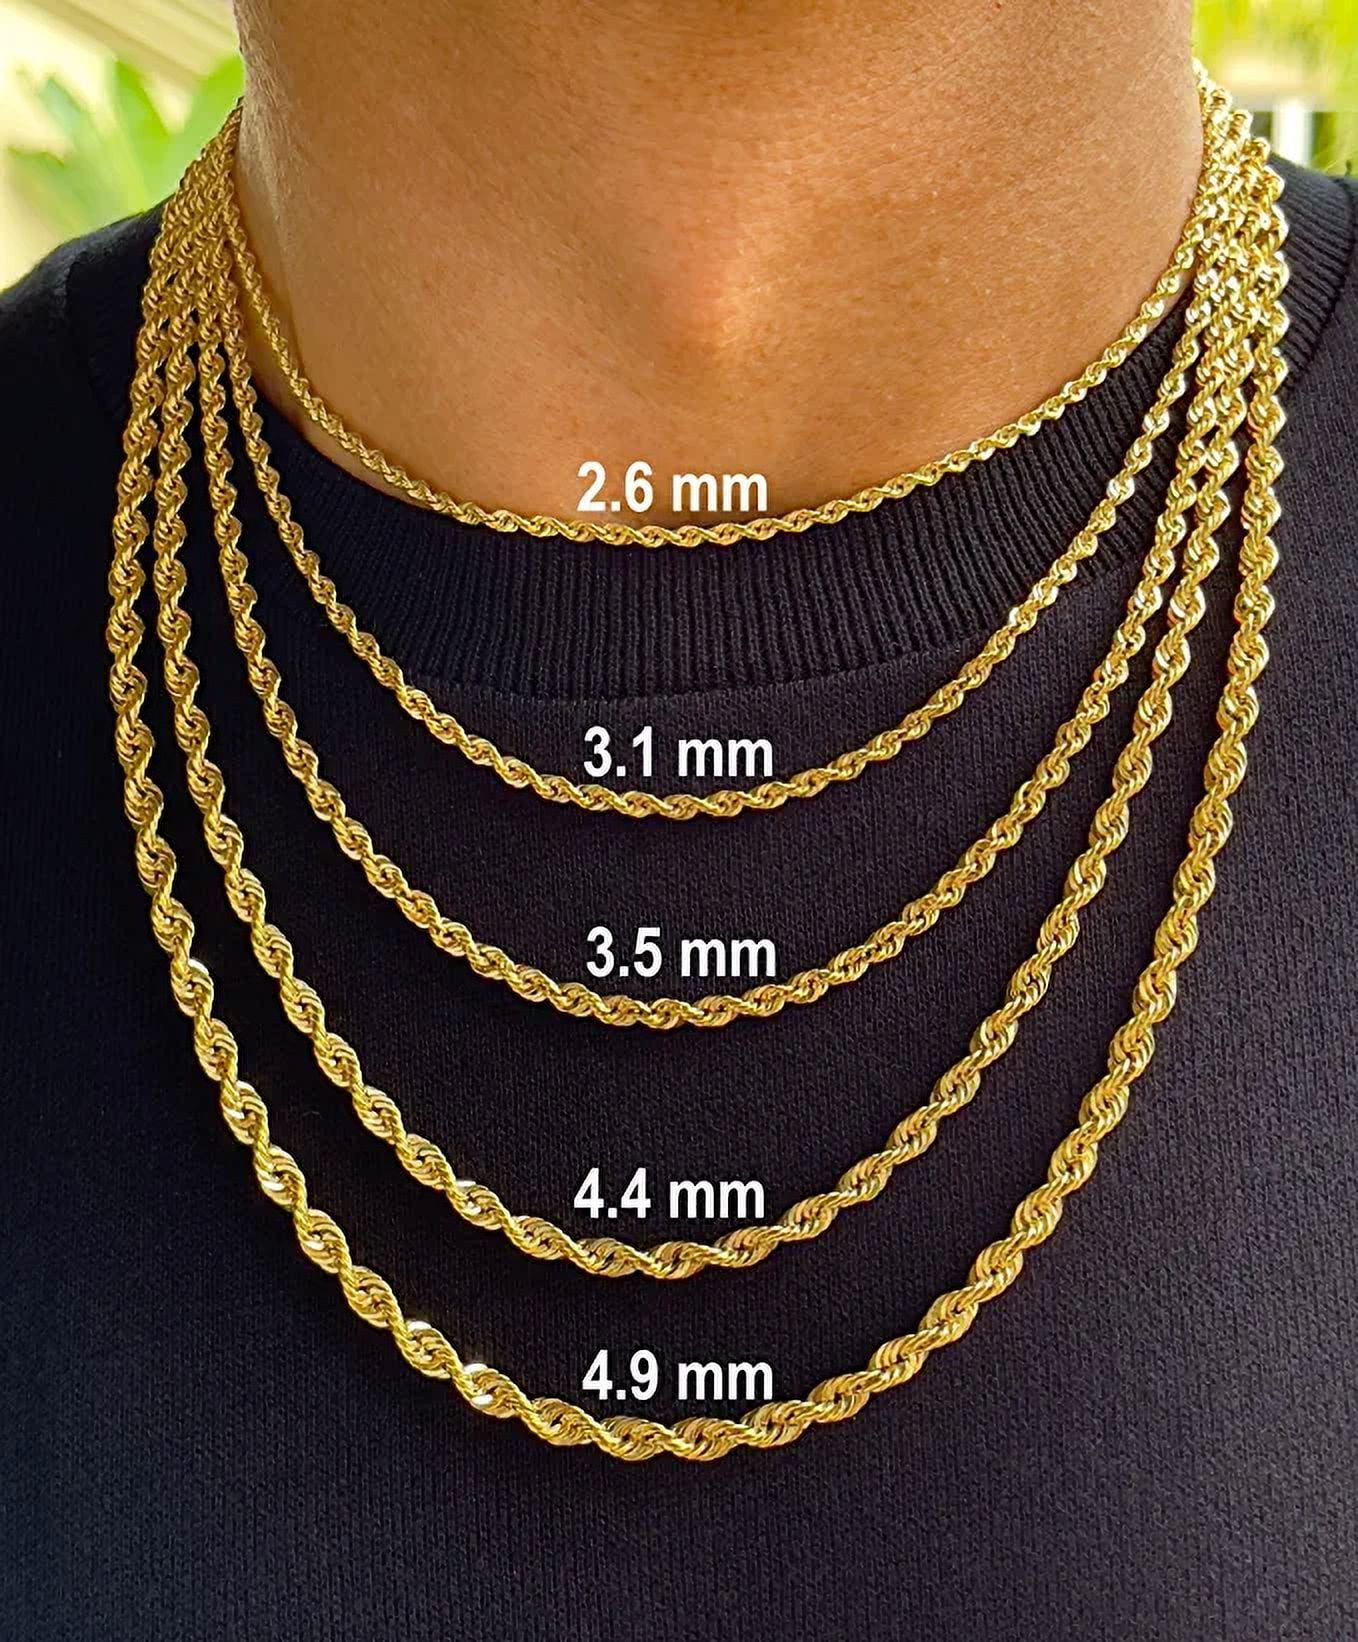 Men's 3.5mm Solid Snake Chain Antique-Finish Necklace in Stainless Steel  with Black IP - 20